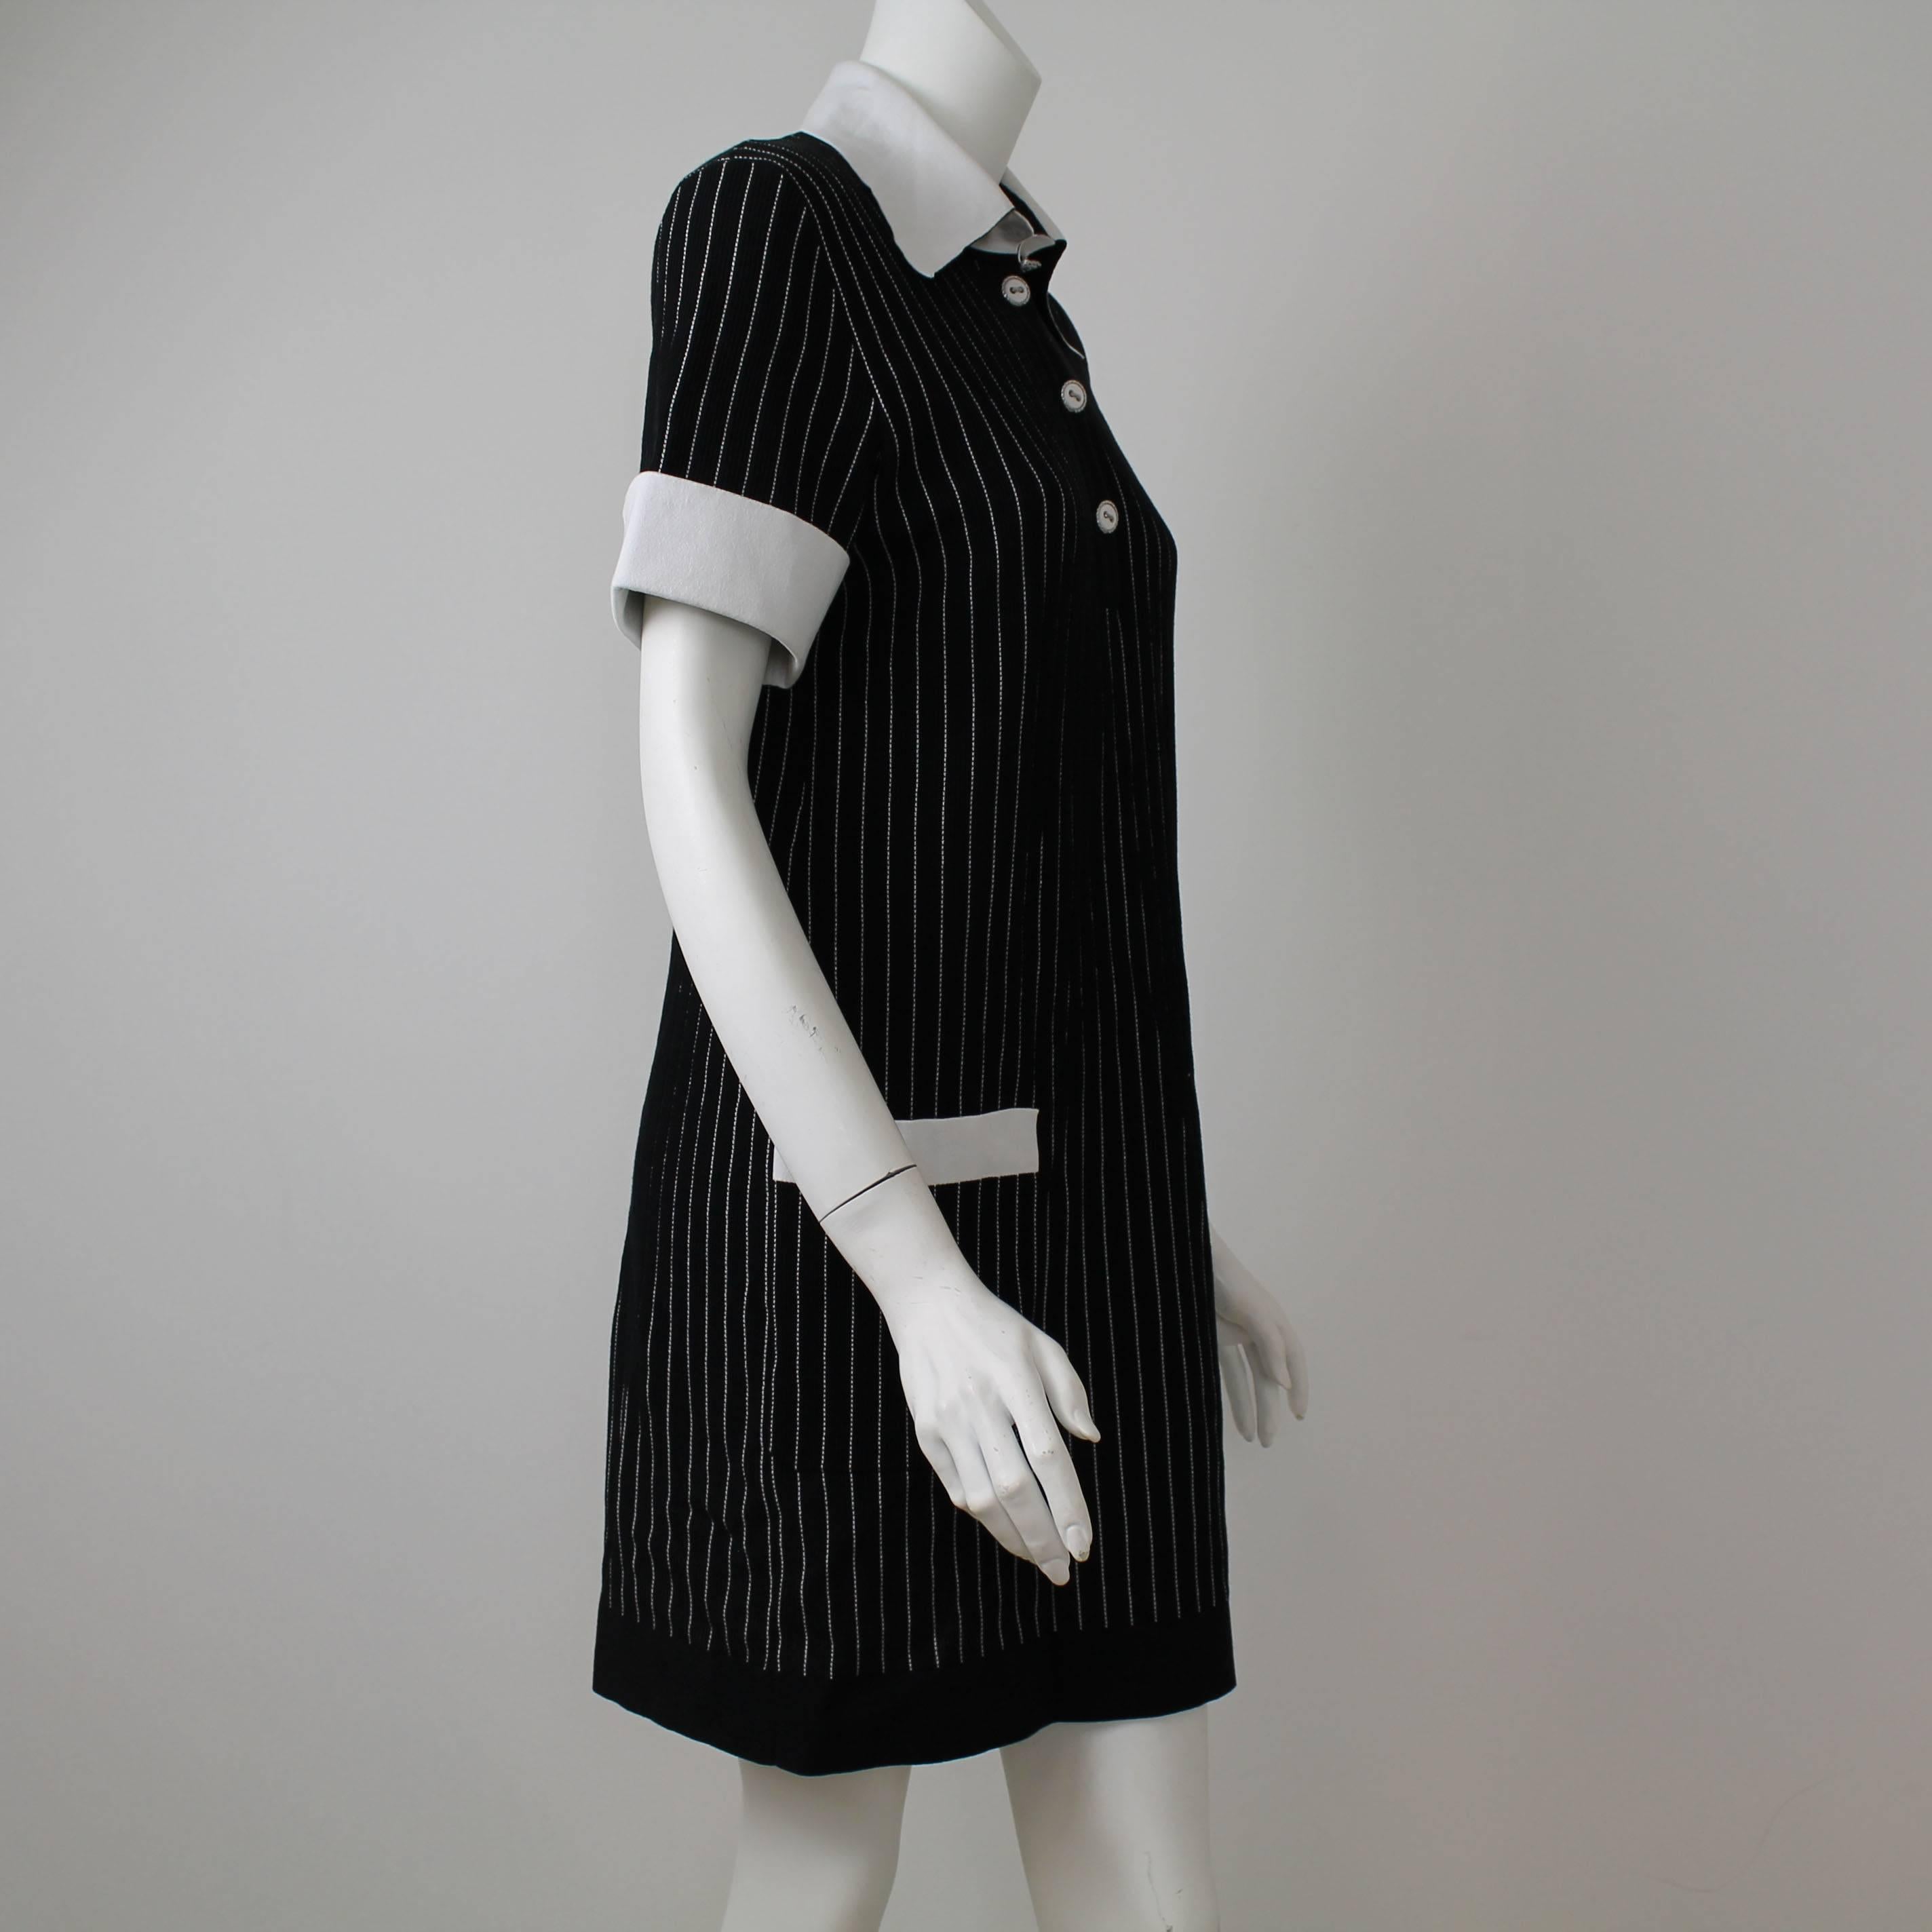 Chanel black and white pinstripe shirt dress perfect for the summer. Features: White collar, pinstripe, 84% cotton, 16 % nylon. 3/4 sleeve, above the knee. 

Conditions: Brand New

Does not include anything